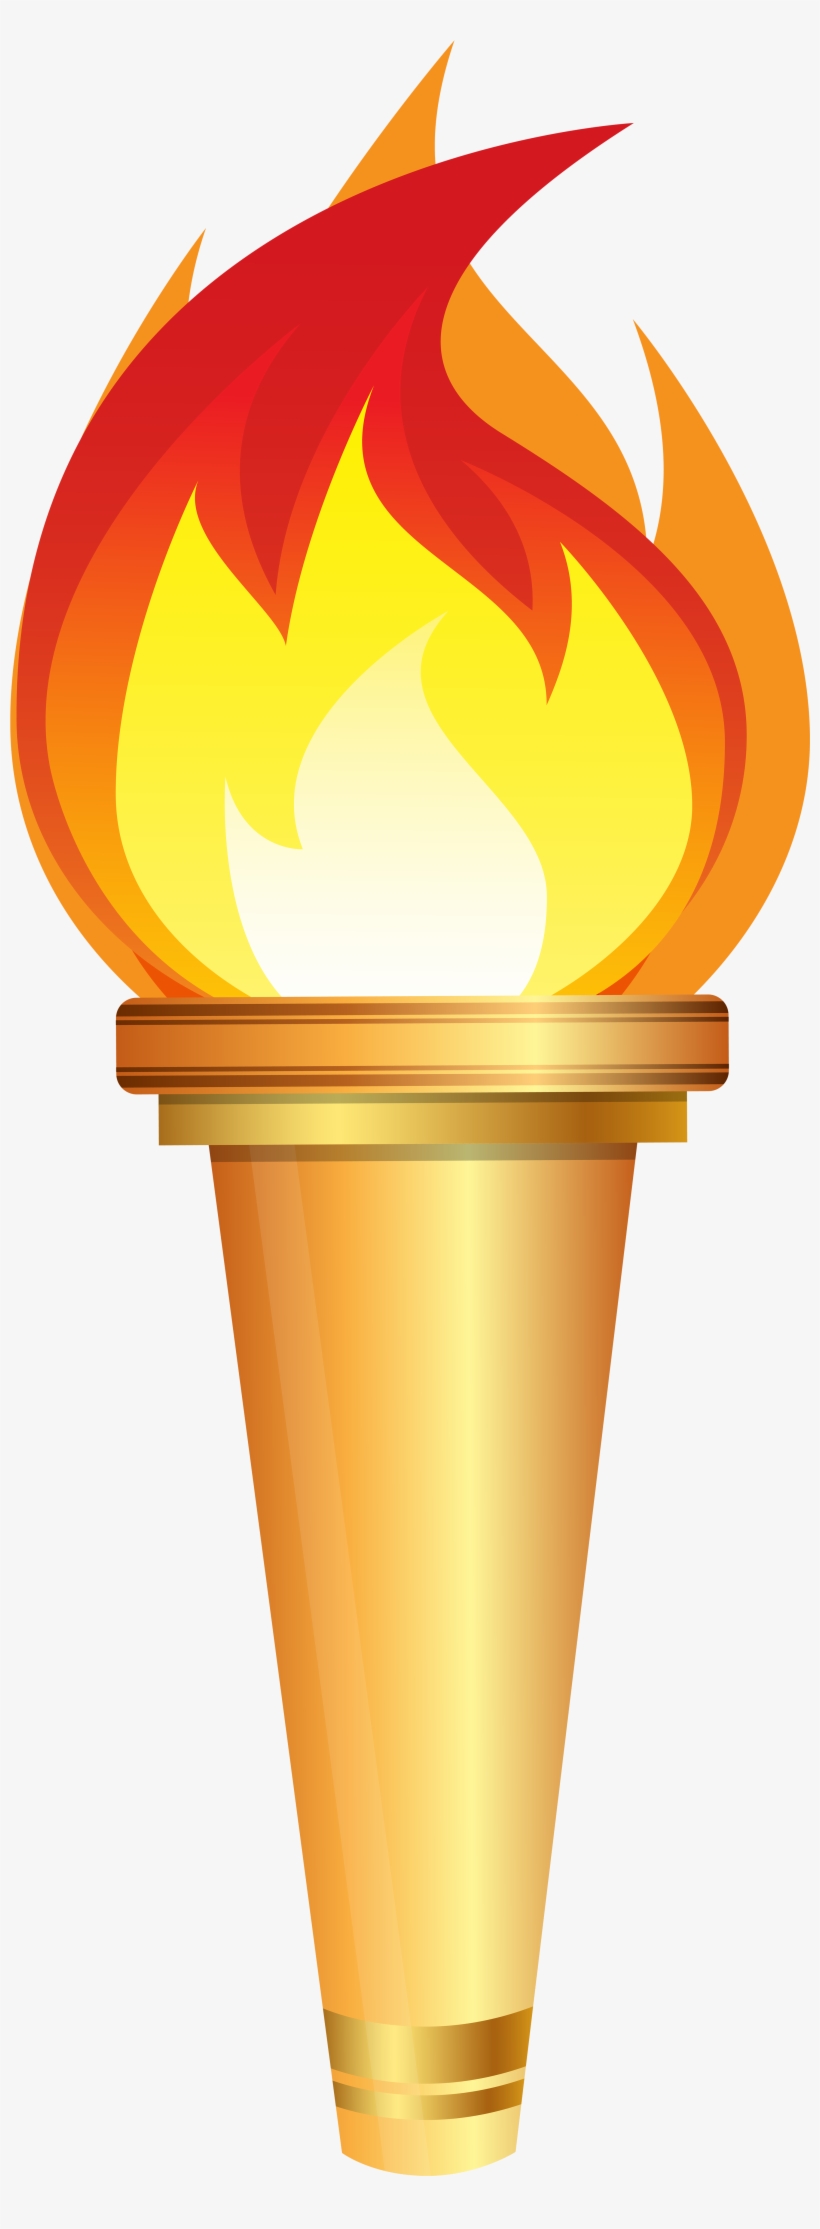 Olympic Torch Clipart, transparent png #179074